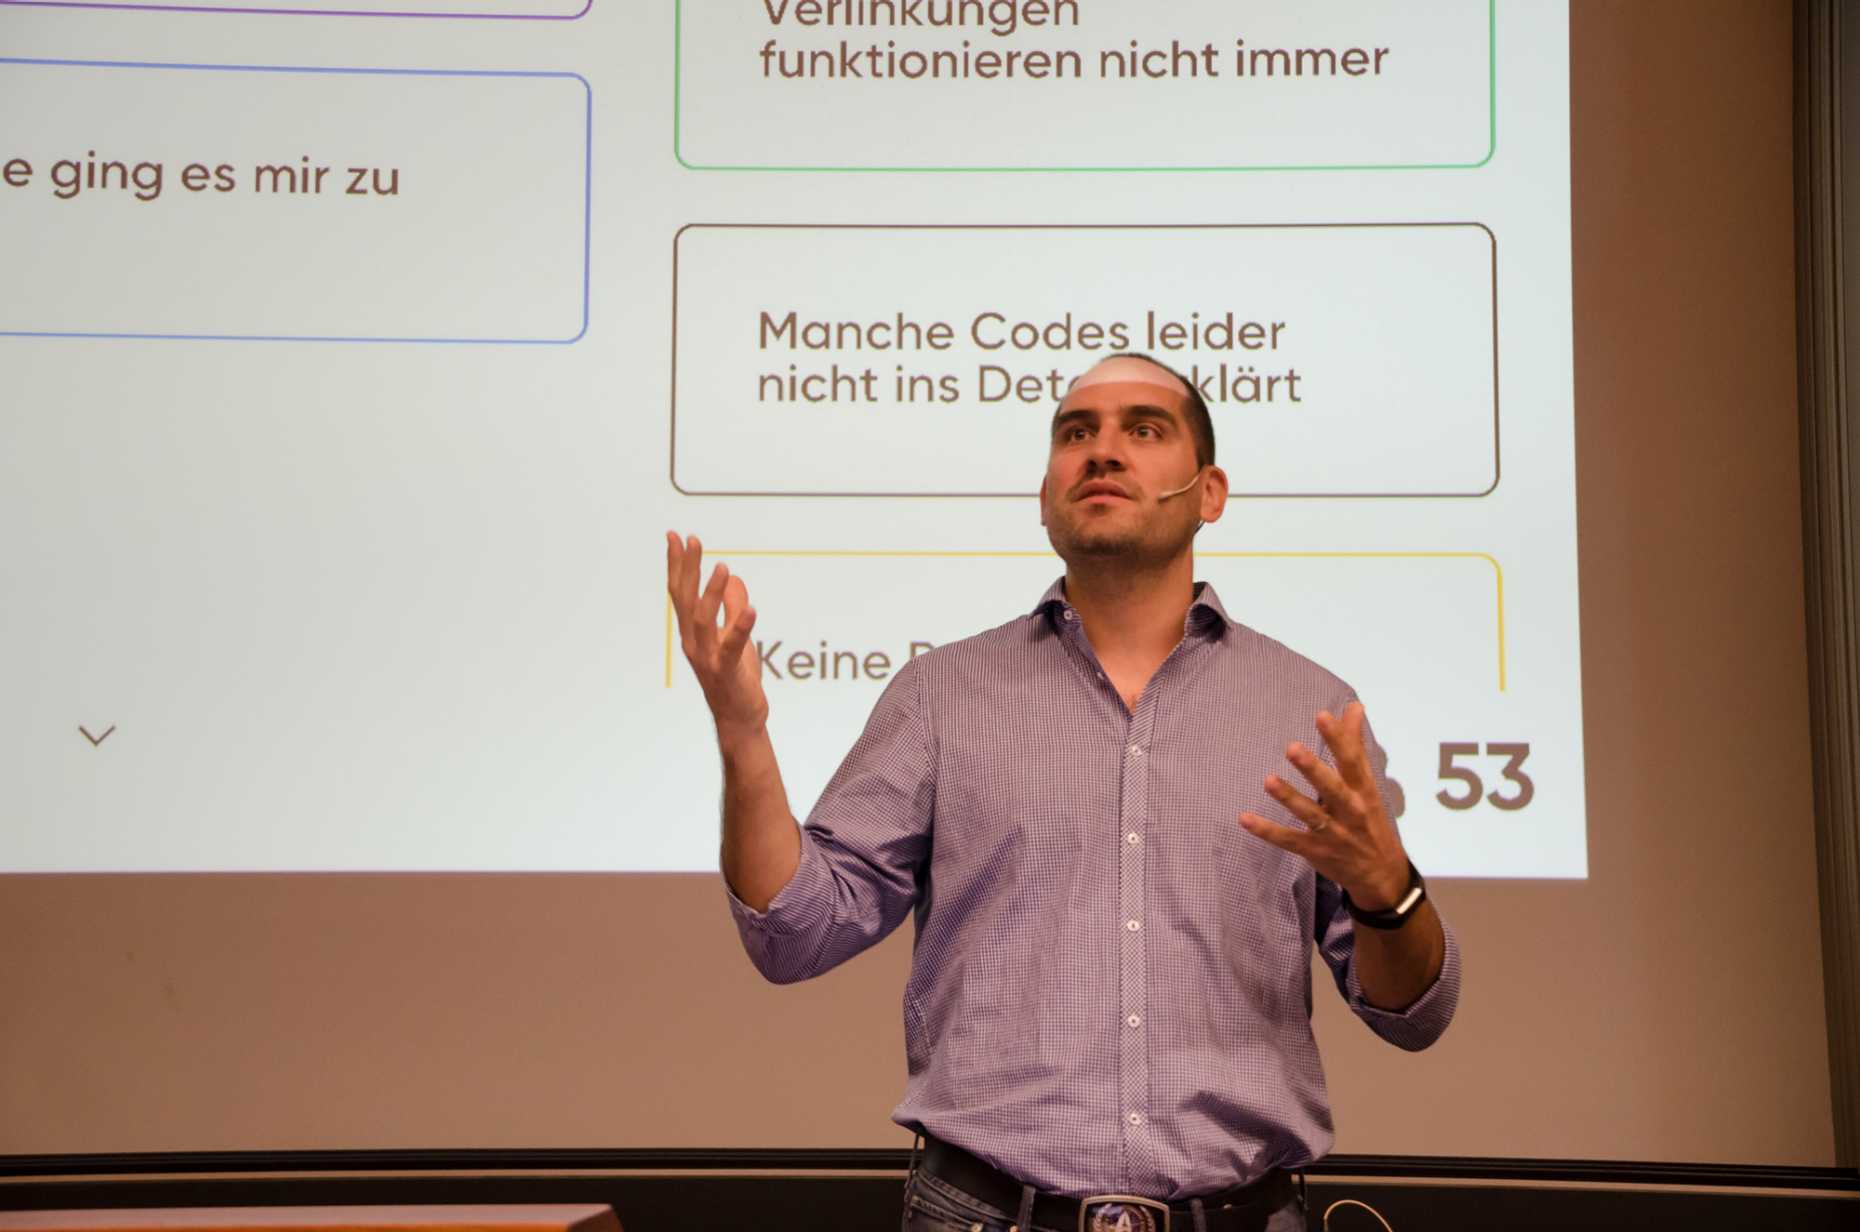 Hermann Lehner receives anonymous feedback on the first excercise in Code Expert from first-year students of Environmental Engineering and Geospatial Engineering.